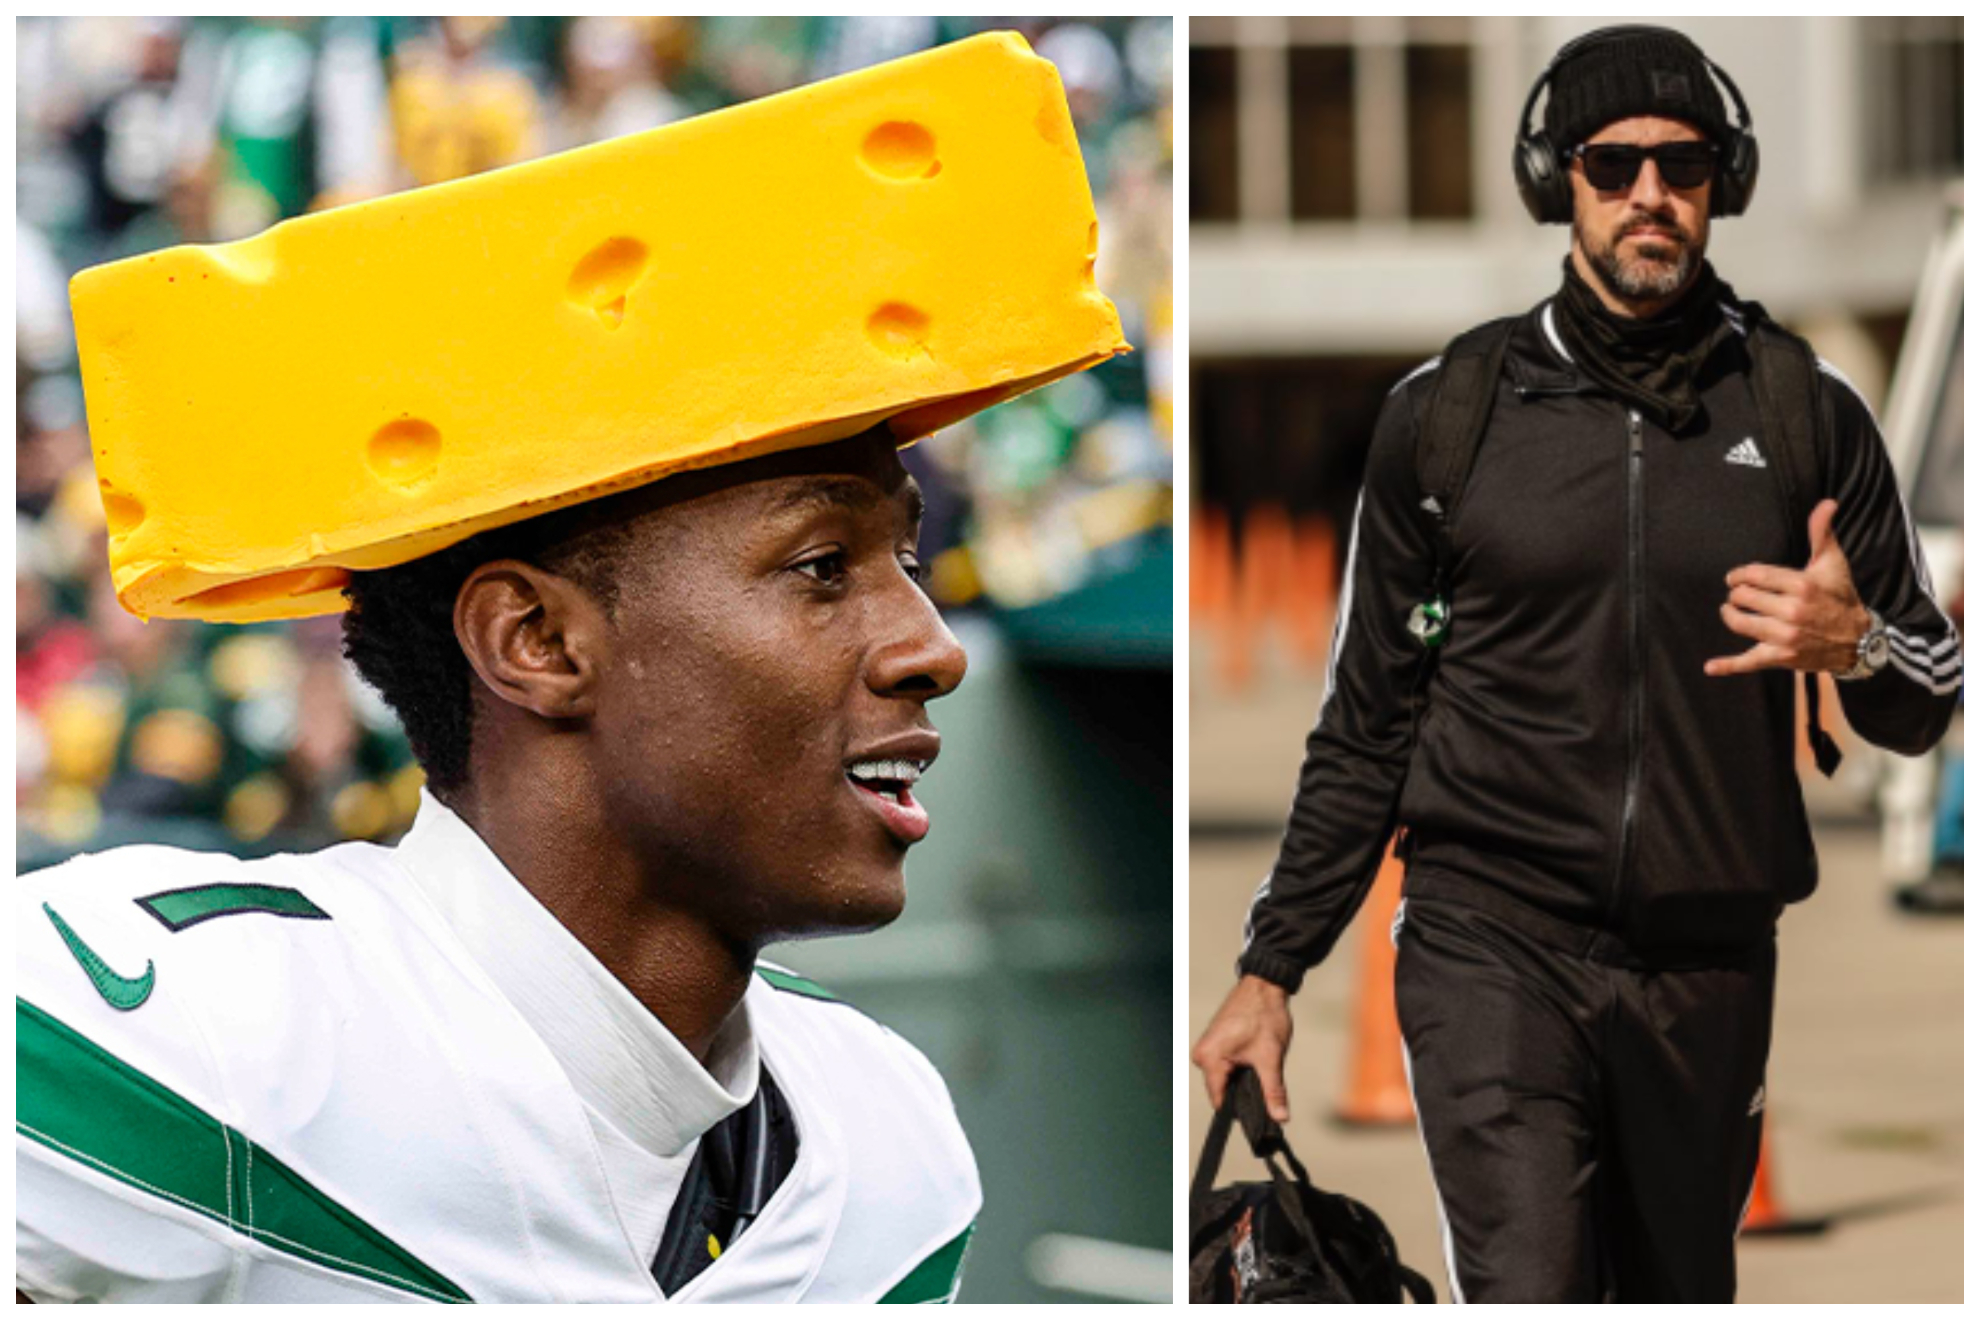 Gardner has since burned the cheesehead.